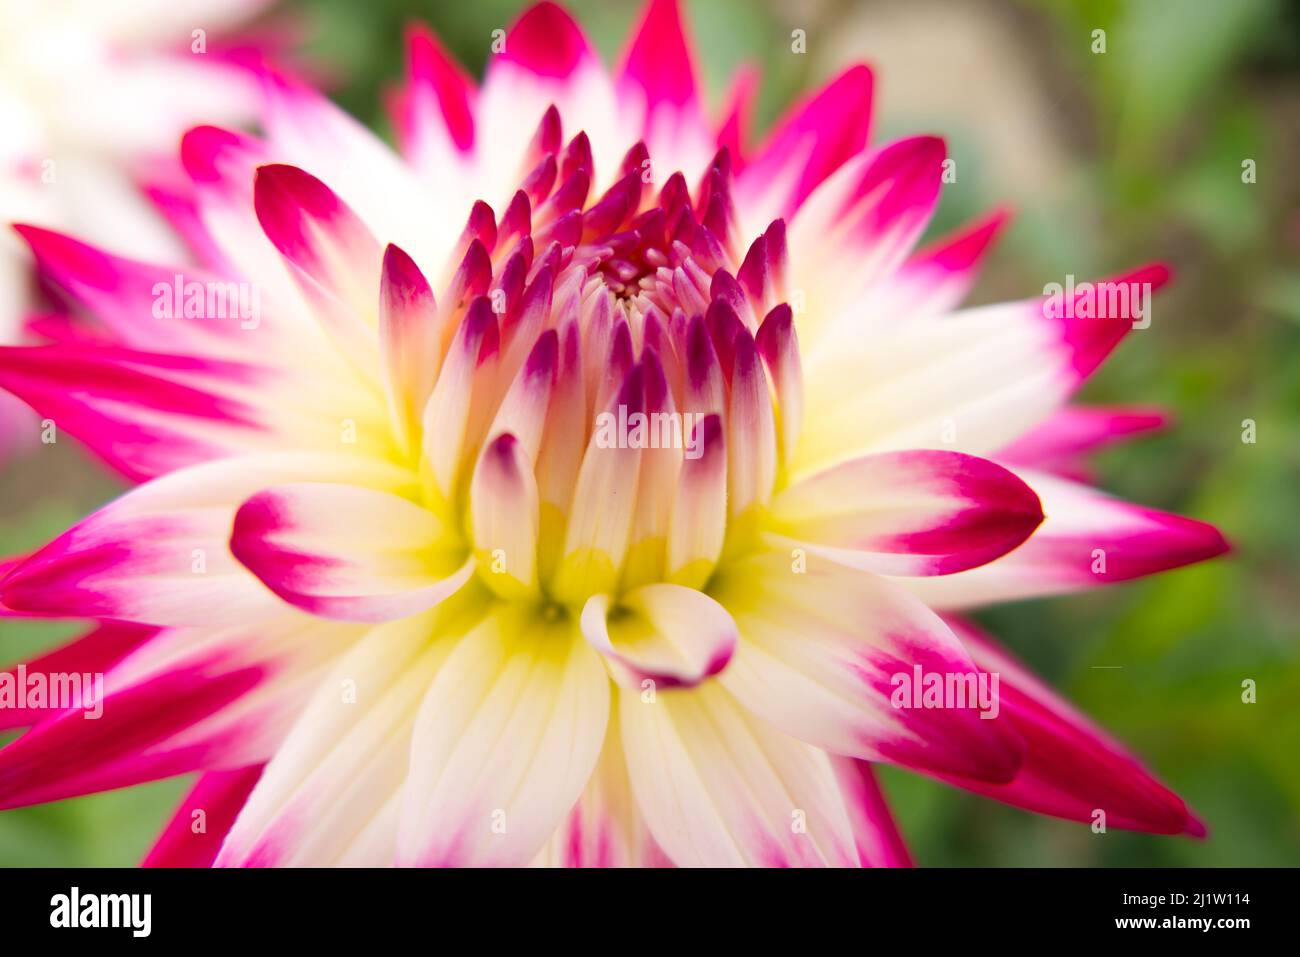 Close-up of the cream and pink-purple flower of semi-cactus dahlia Match. Focus on the centre. Short-depth of field, so the outer petals are blurred. Stock Photo